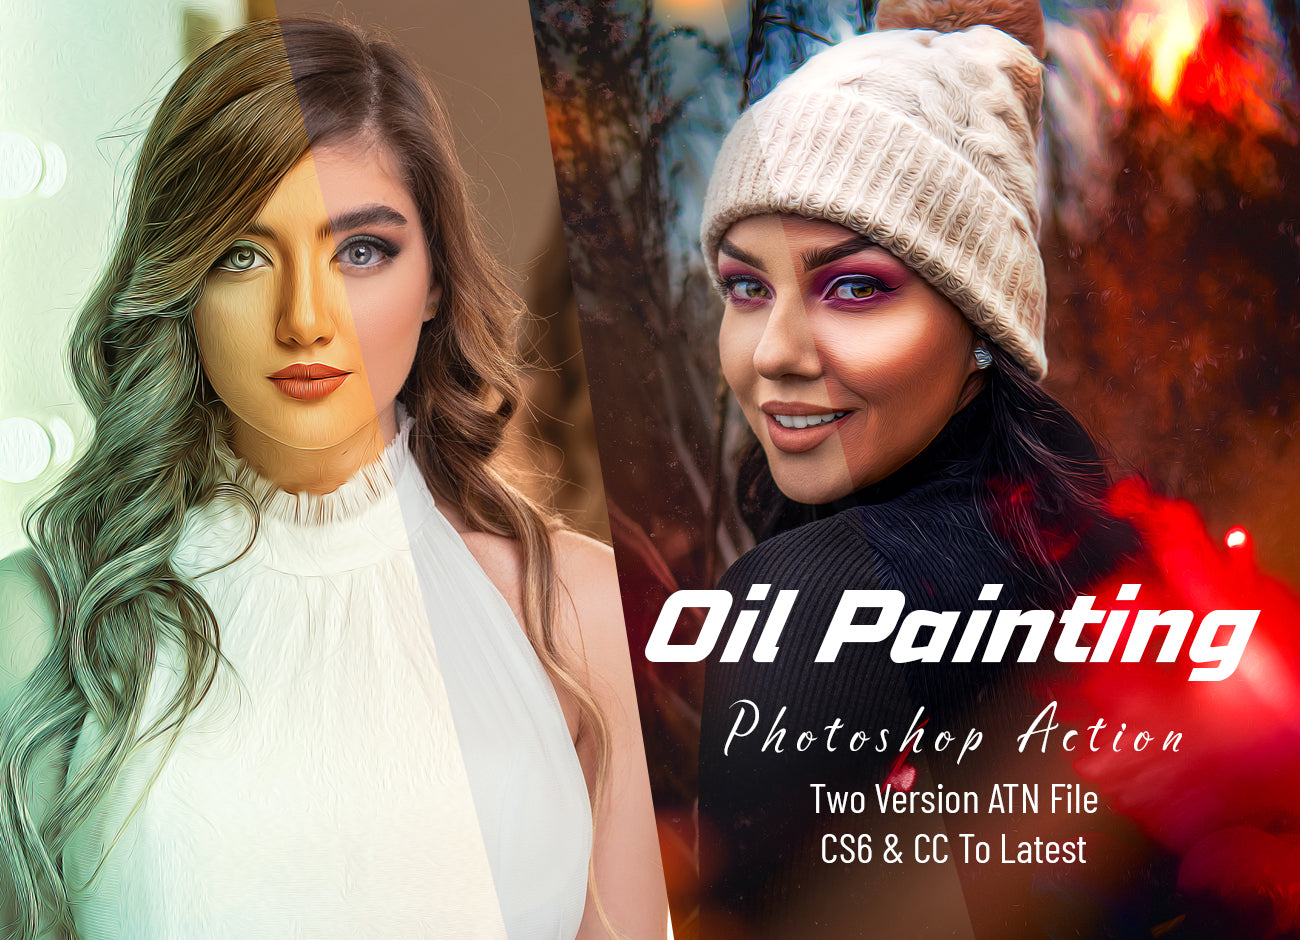 15-In-1 Real Effect Photoshop Actions Bundle - Artixty